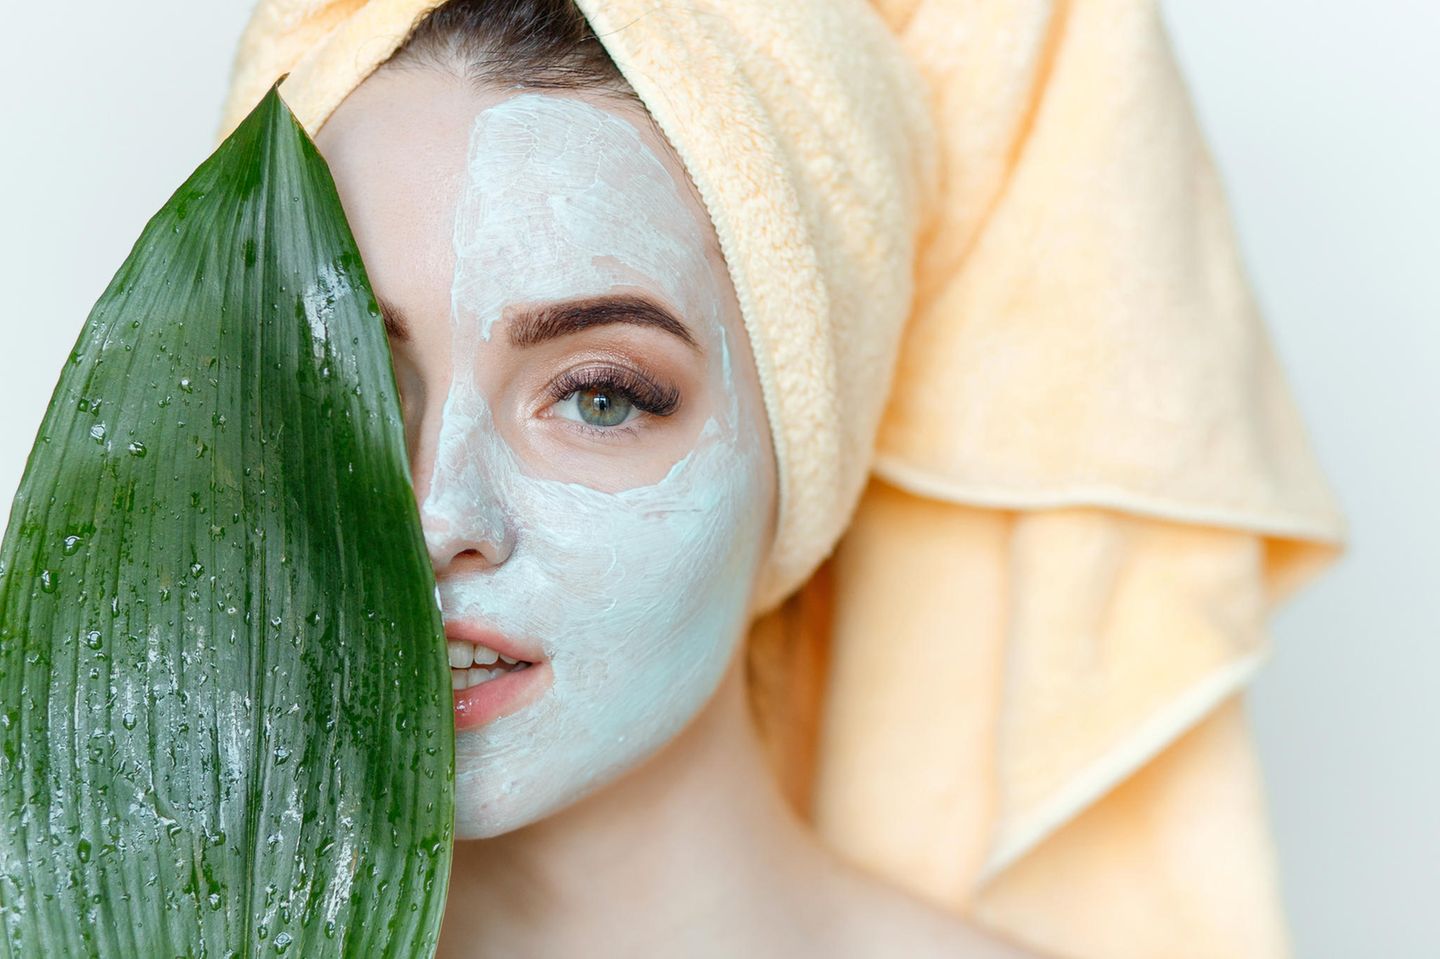 Woman with mask, nourishing facial mask on the skin